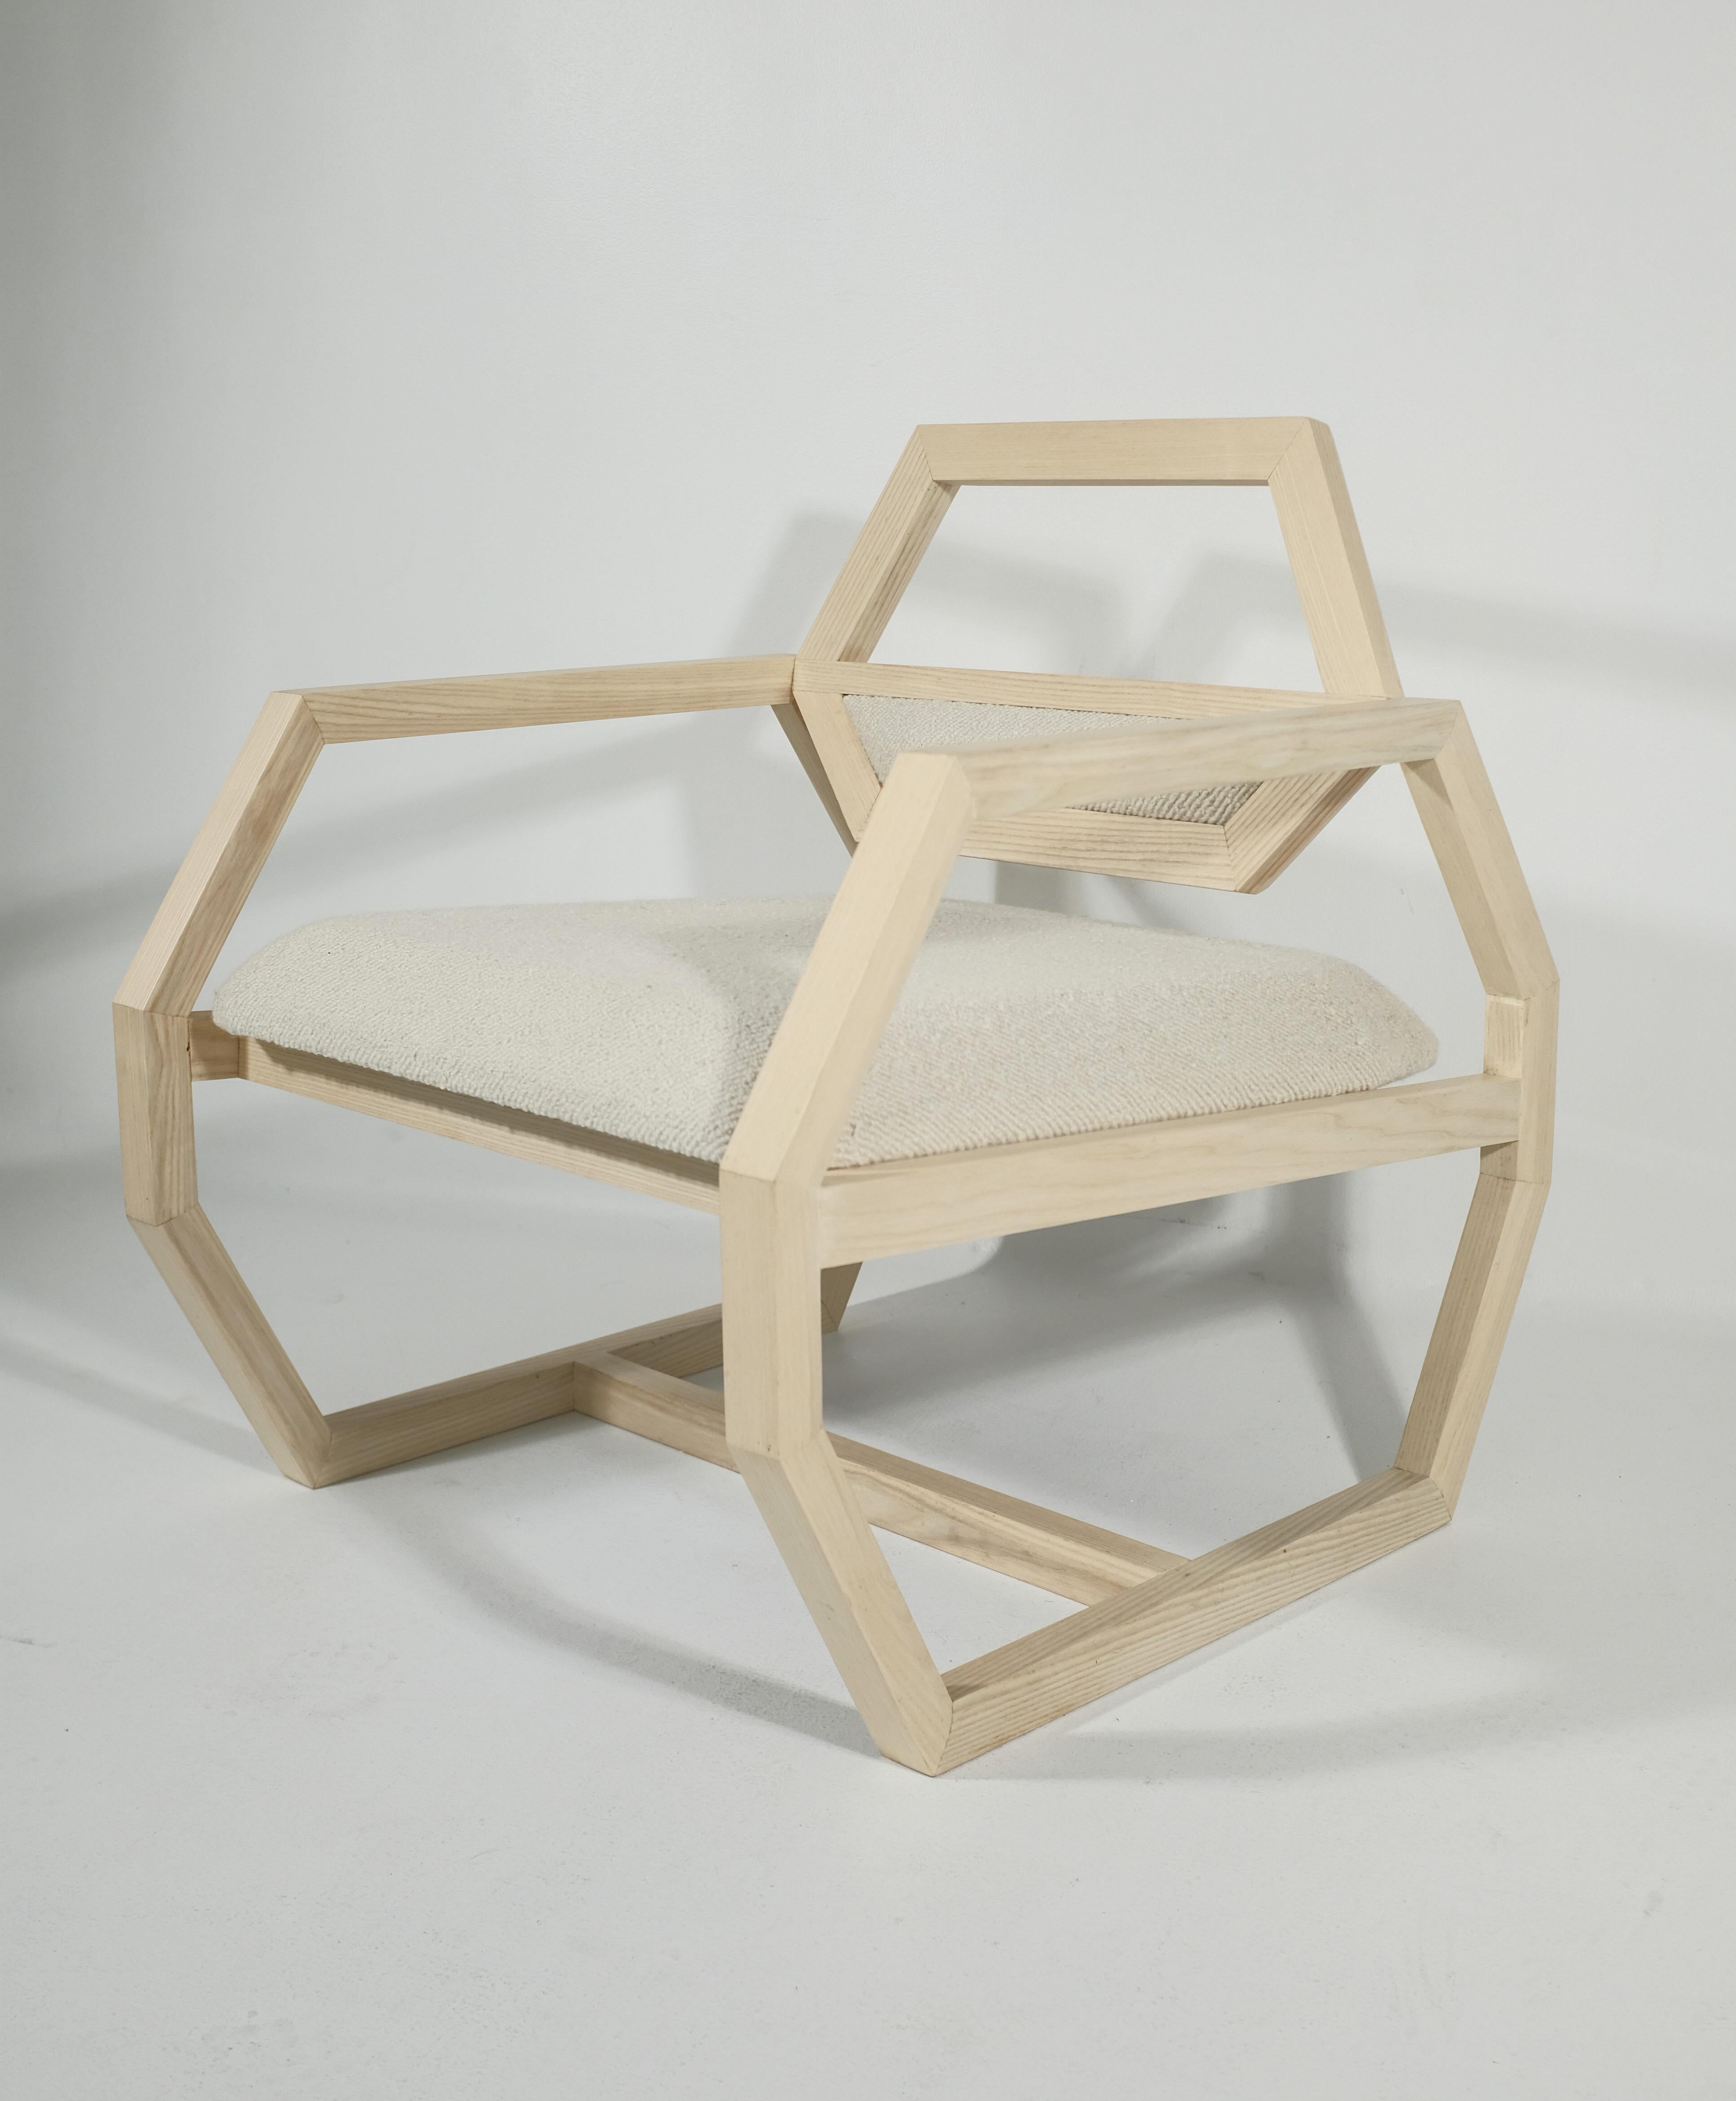 The Marcel Accent chair is a Futuristic, bold, and comfortable chair, inspired by organic hexagon shape. The chair is named after Nathan's late dog Marcel (Maltese). Marcel Accent chair will stand out in any room, its slightly wider seat allows